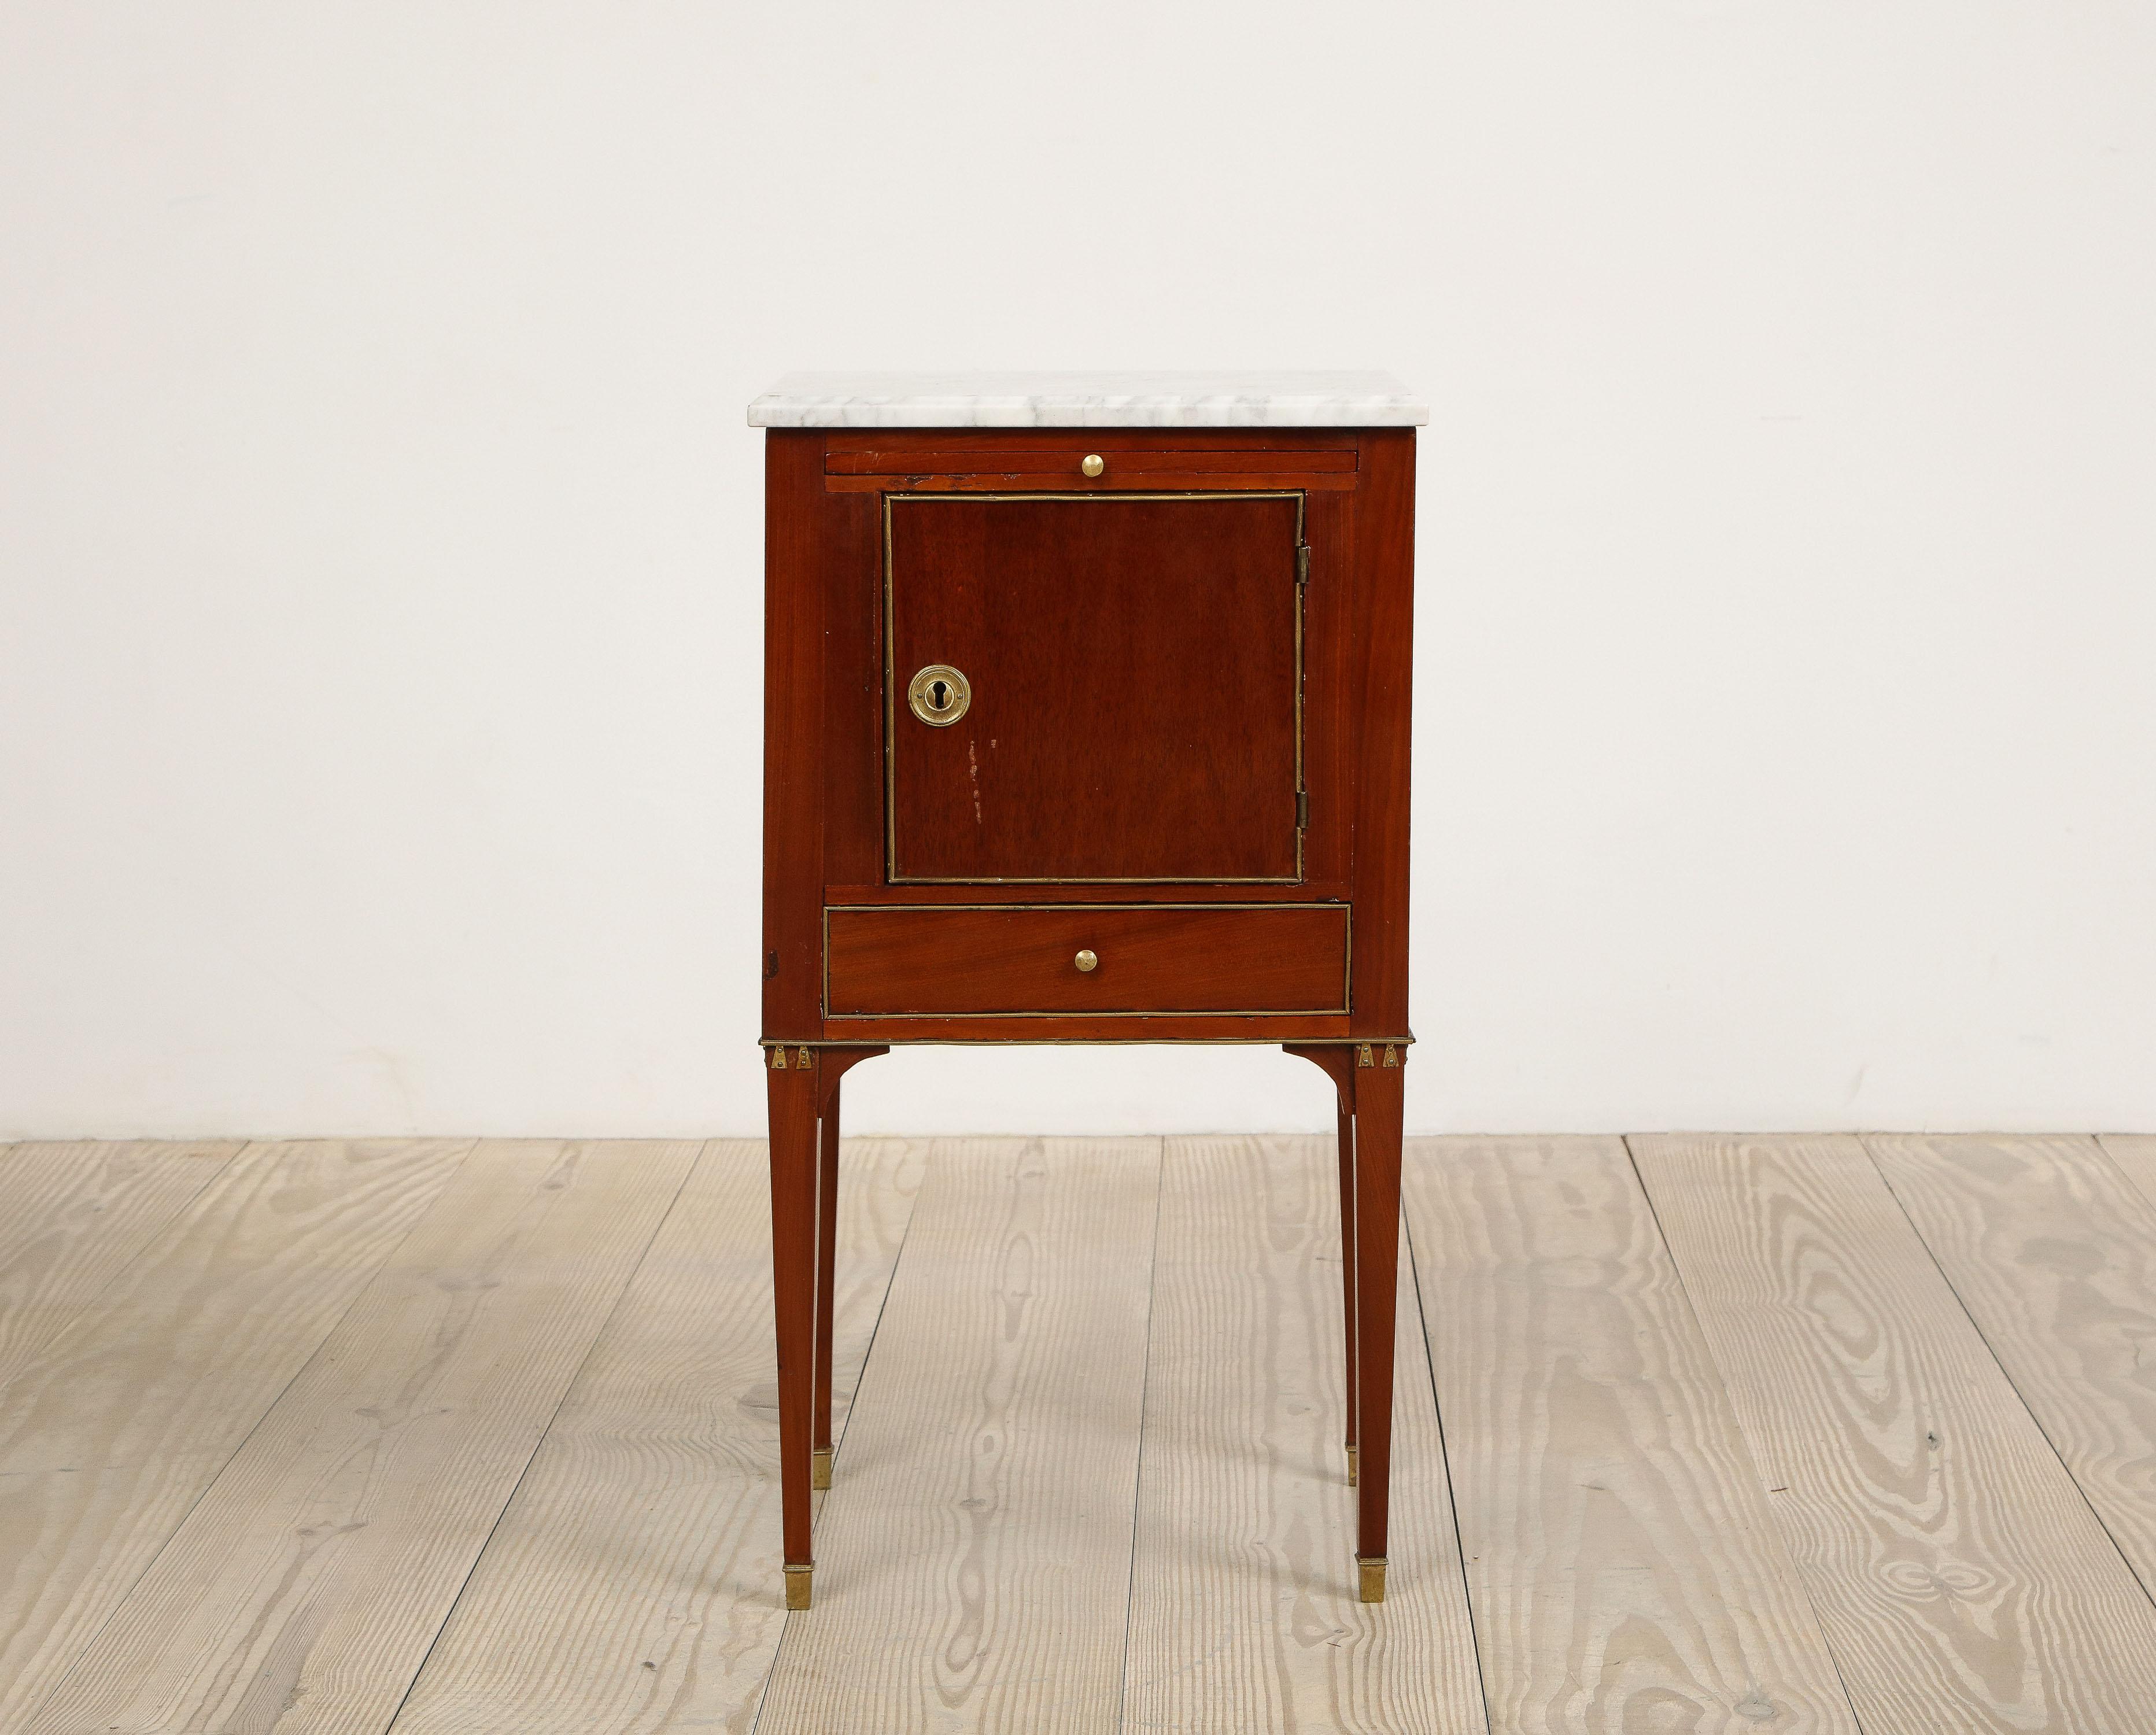 19th Century Swedish Mahogany Gustavian-Style with Marble Top Side Table/Cabinet, circa 1850 For Sale